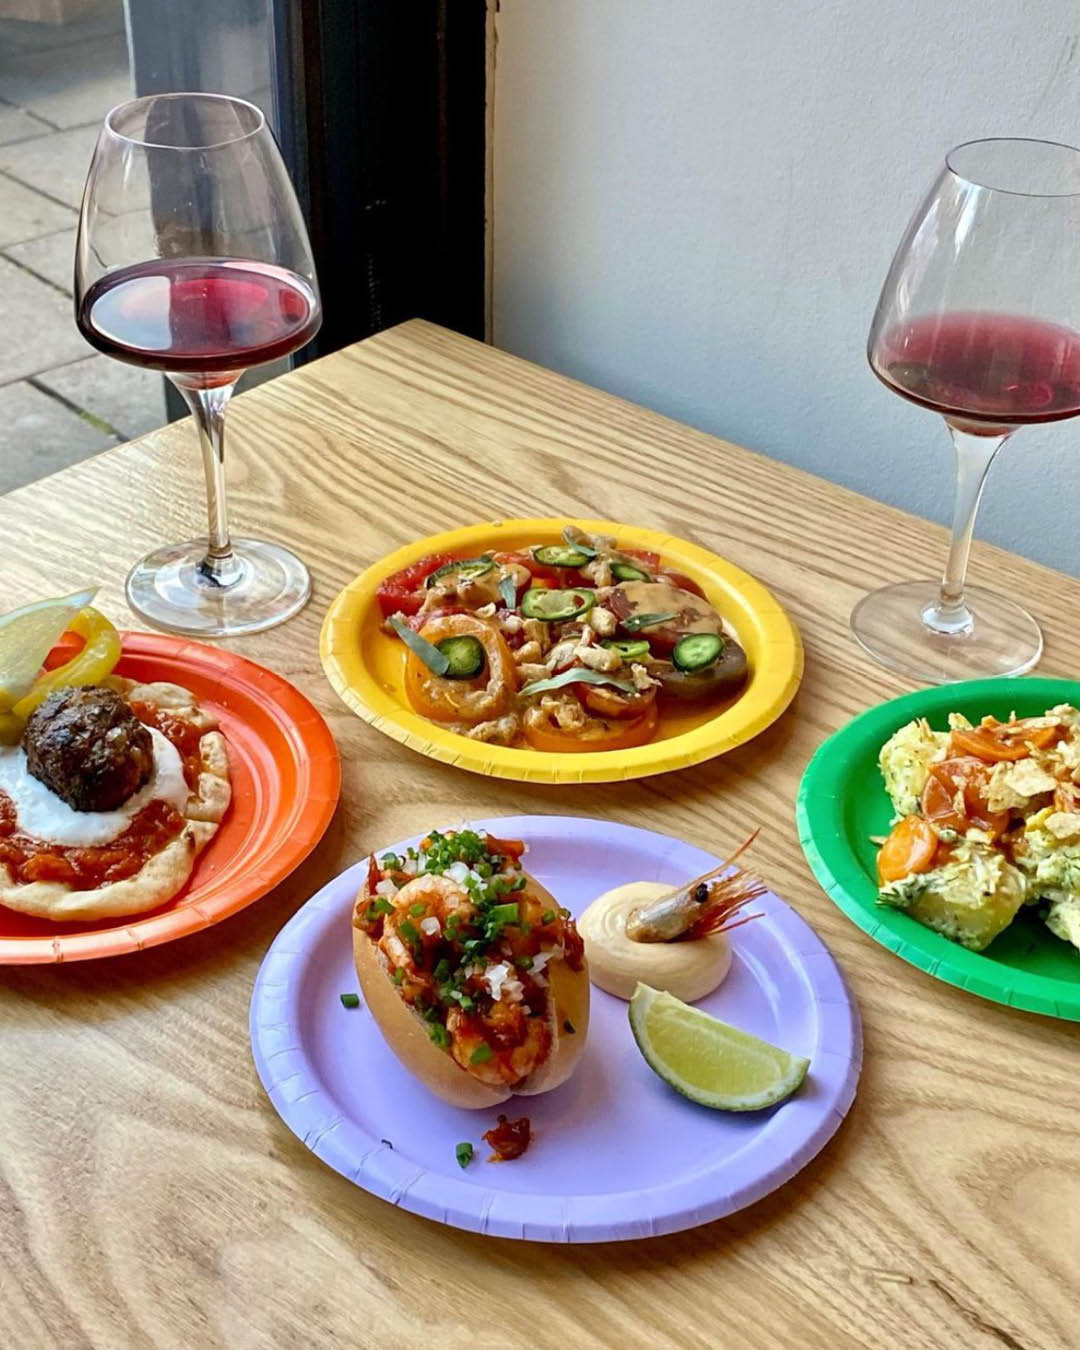 Colourful plates and glasses of red wine at a Mam Sham pop-up at Peckham Cellars